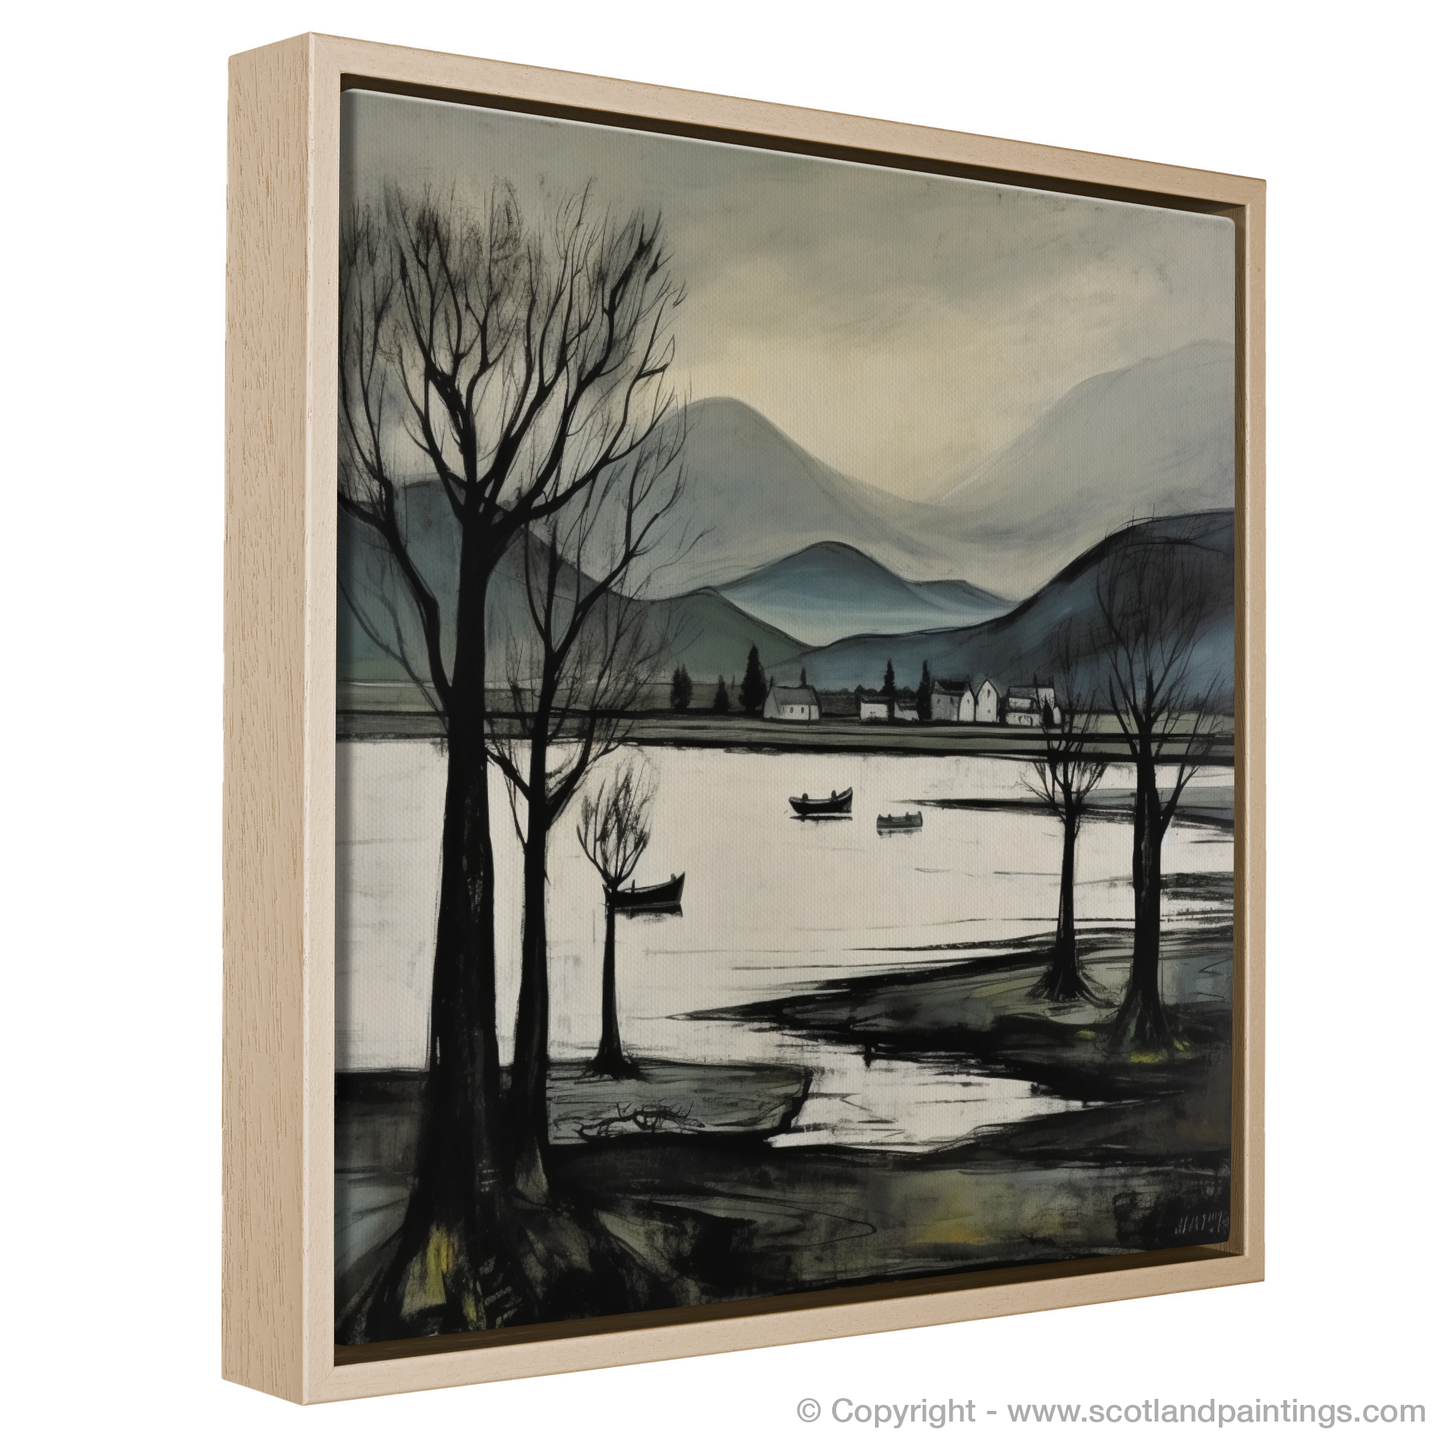 Painting and Art Print of Loch Awe, Argyll and Bute entitled "Whispers of Loch Awe: An Illustrative Expressionist Tribute".